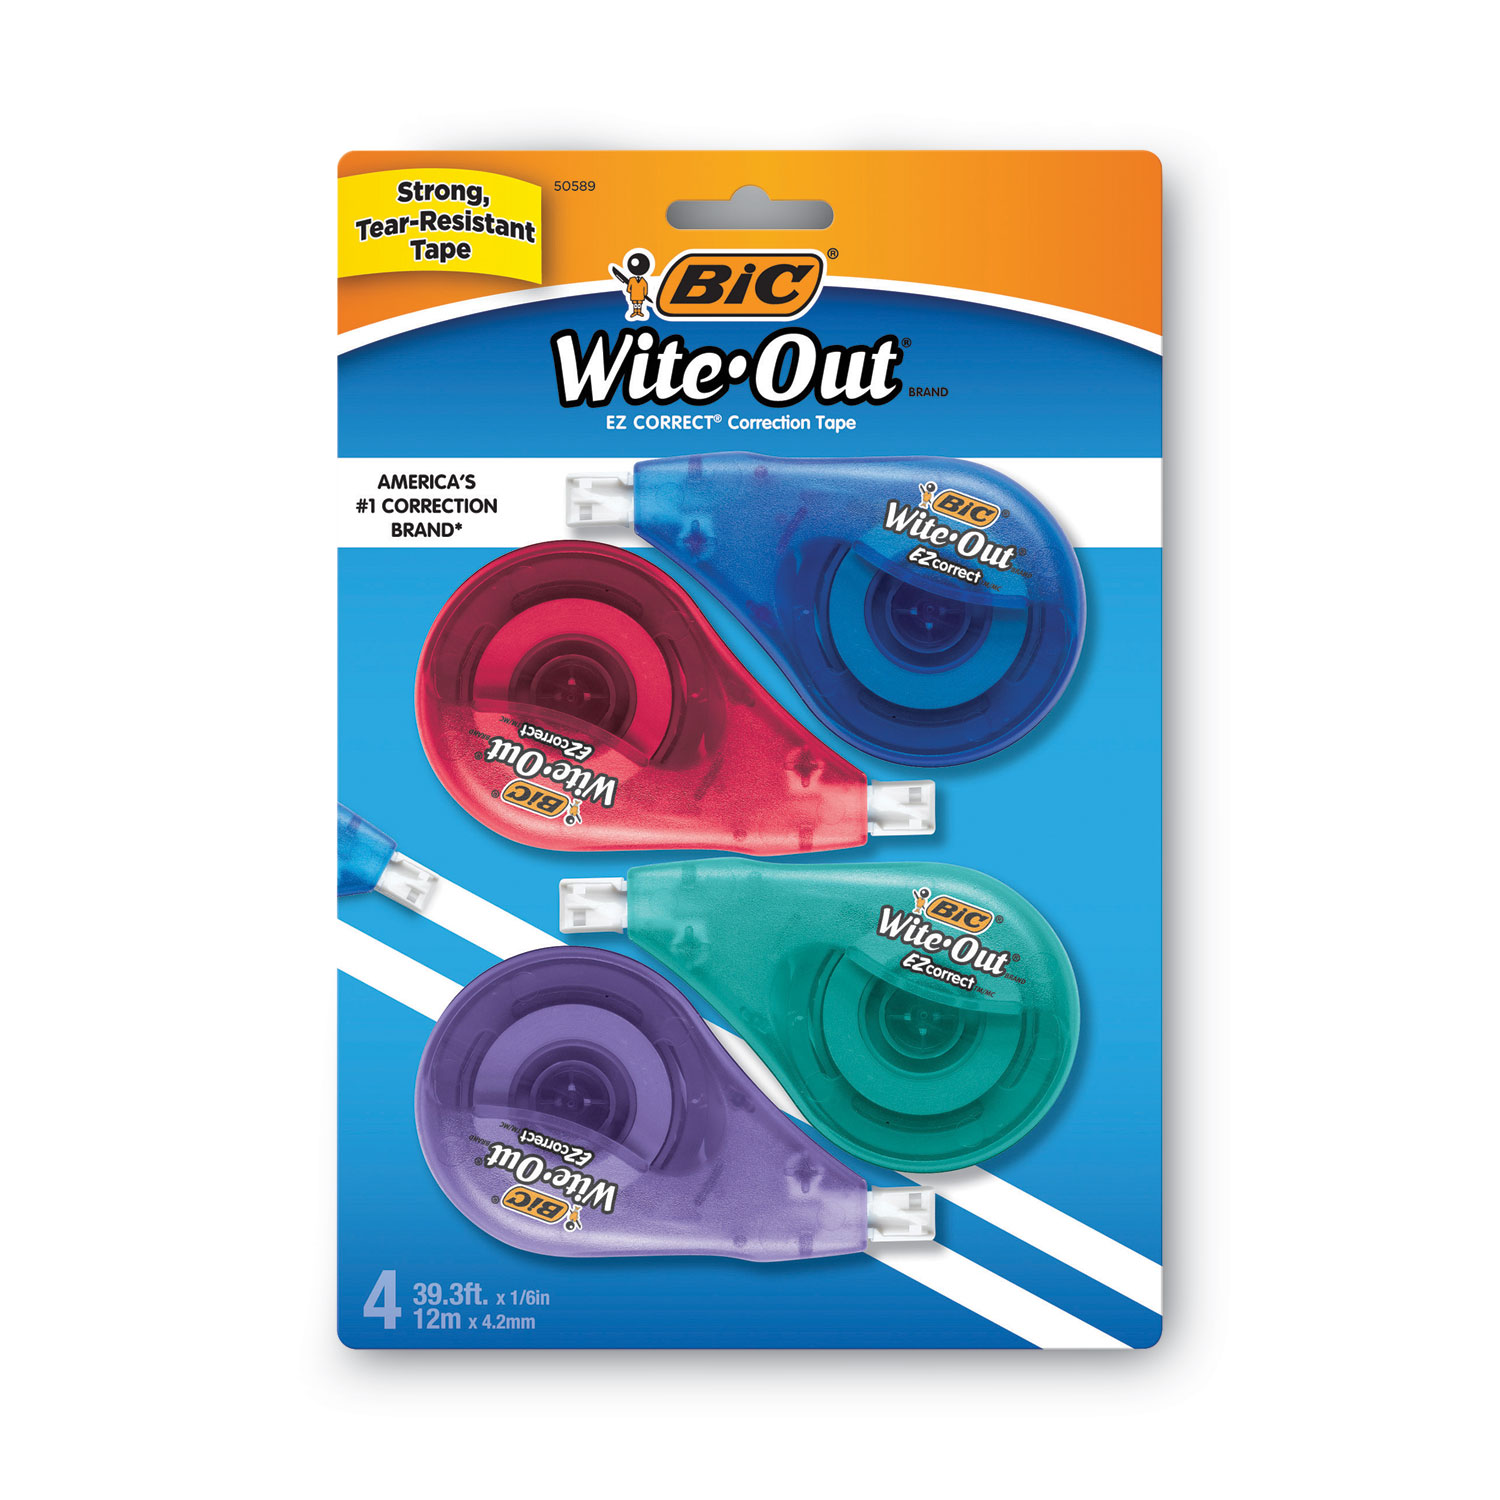 Correction Tape, Pack of 8, Cover The Error with White Tape, Applicator for Instant Corrections, Tape Eraser for Note Taking, Office Supplies